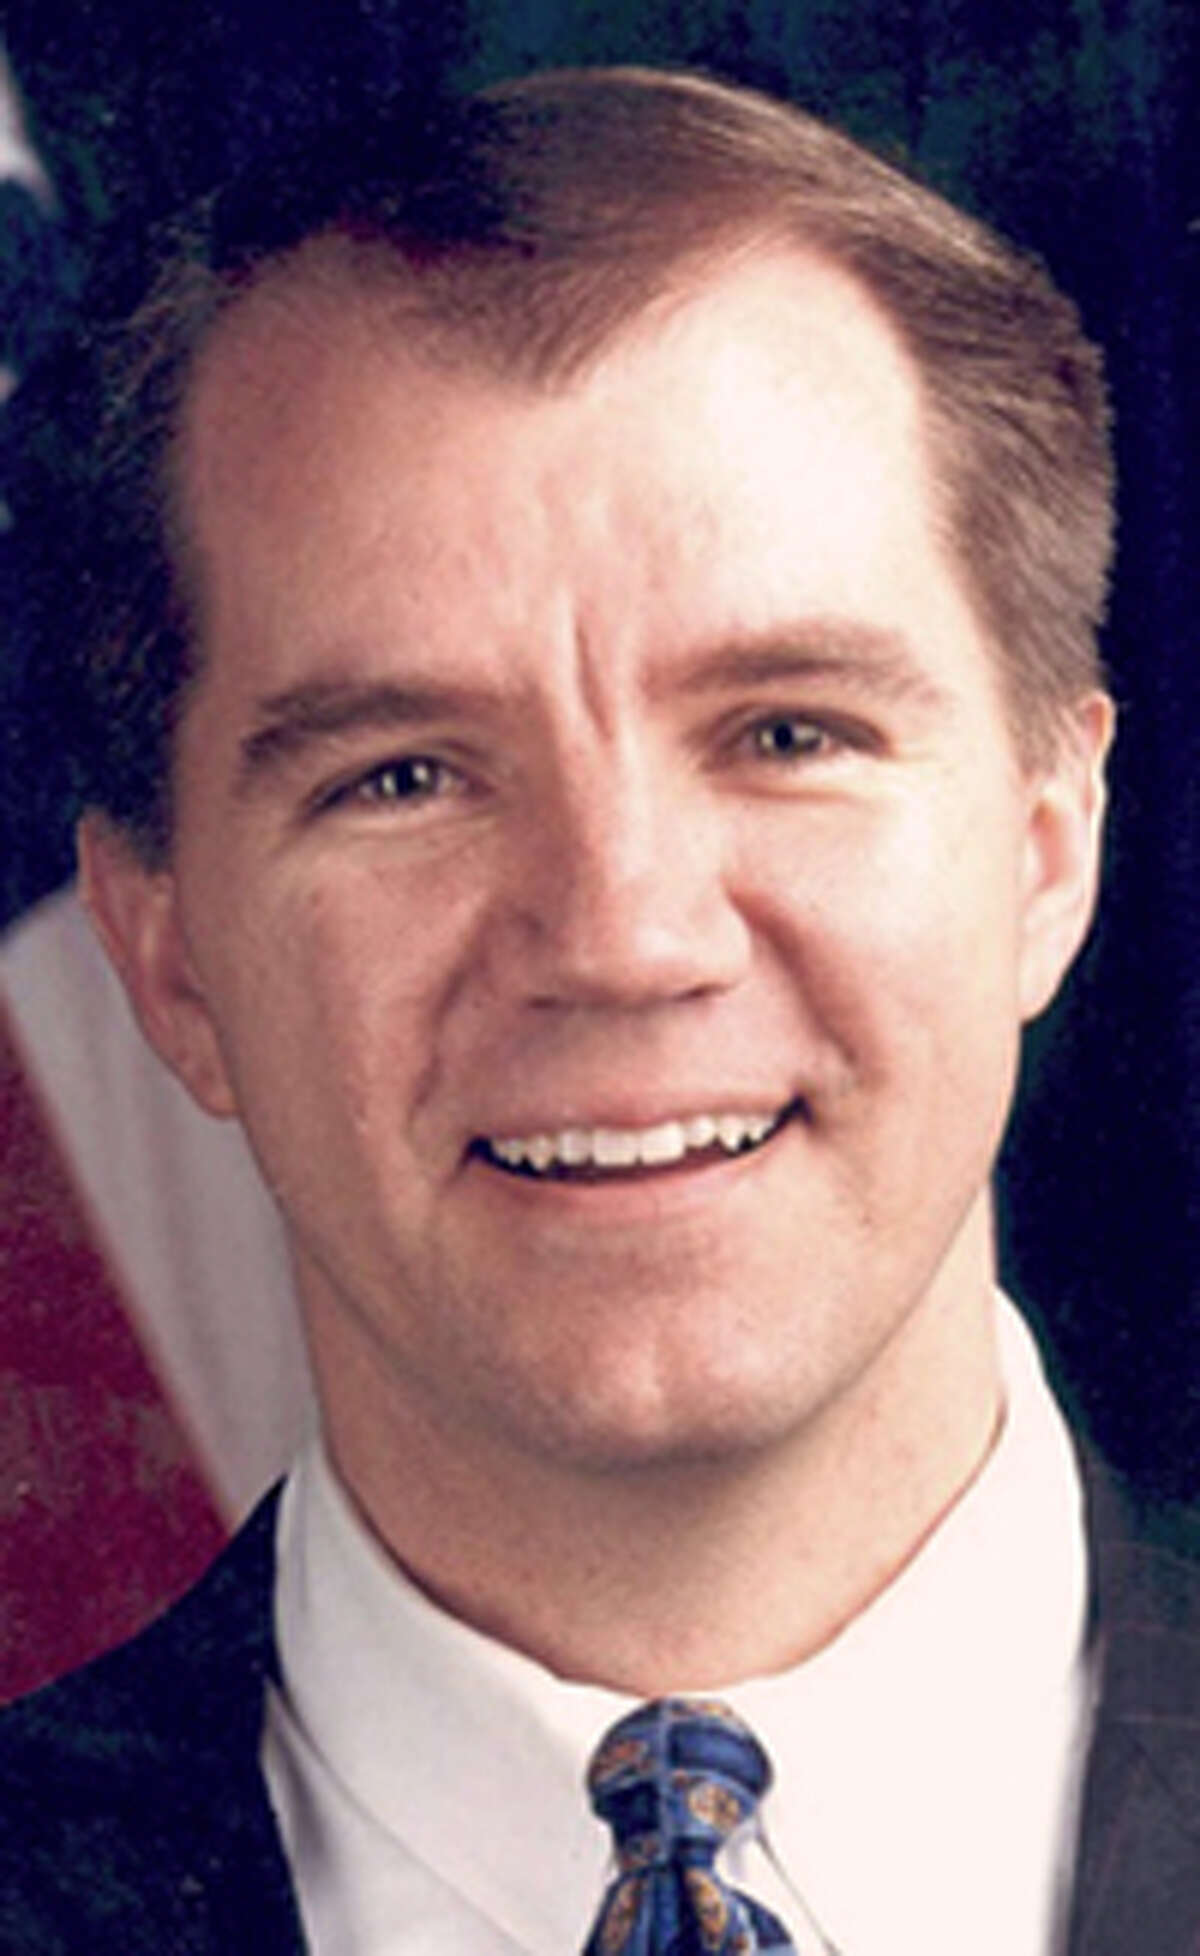 Don Willett has served on the Supreme Court of Texas since 2005.